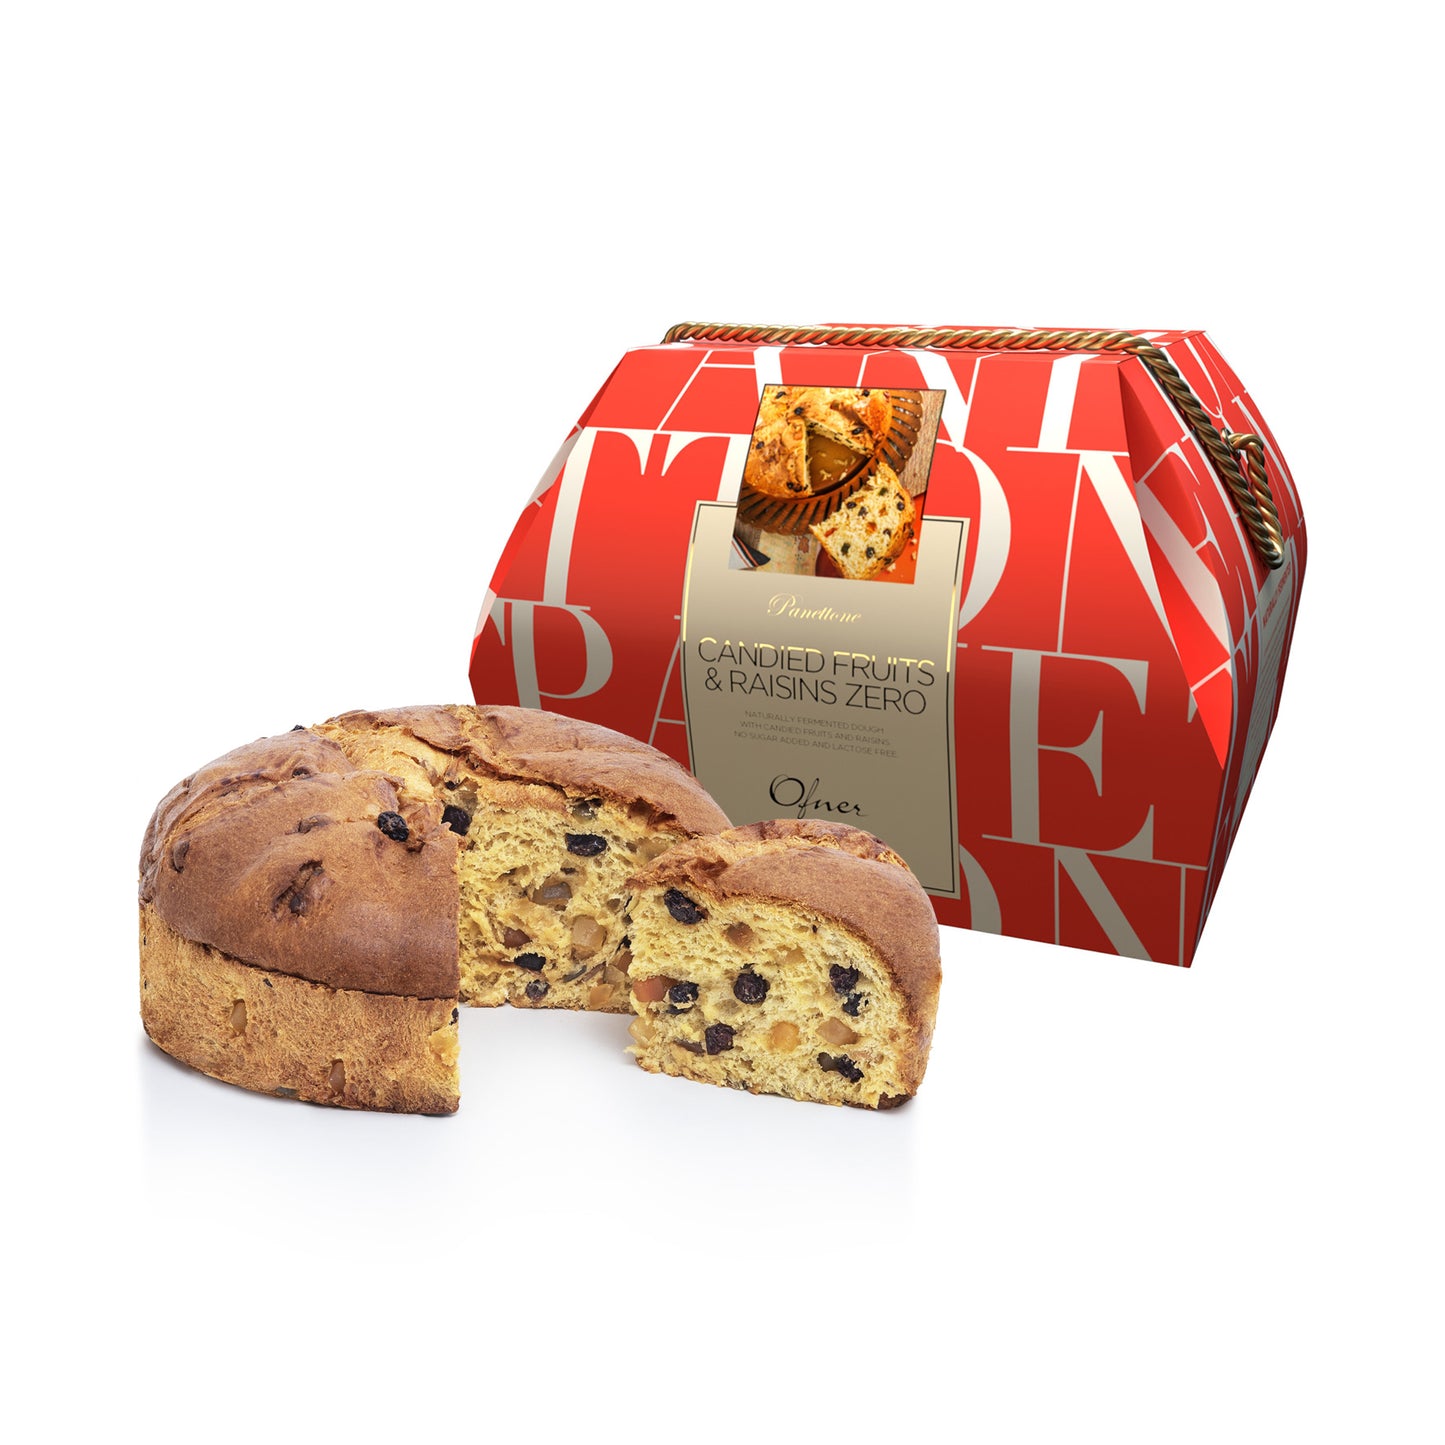 PANETTONE GENOVESE CANDIED FRUITS TRADITIONAL NO SUGAR ADDED 24.69 oz